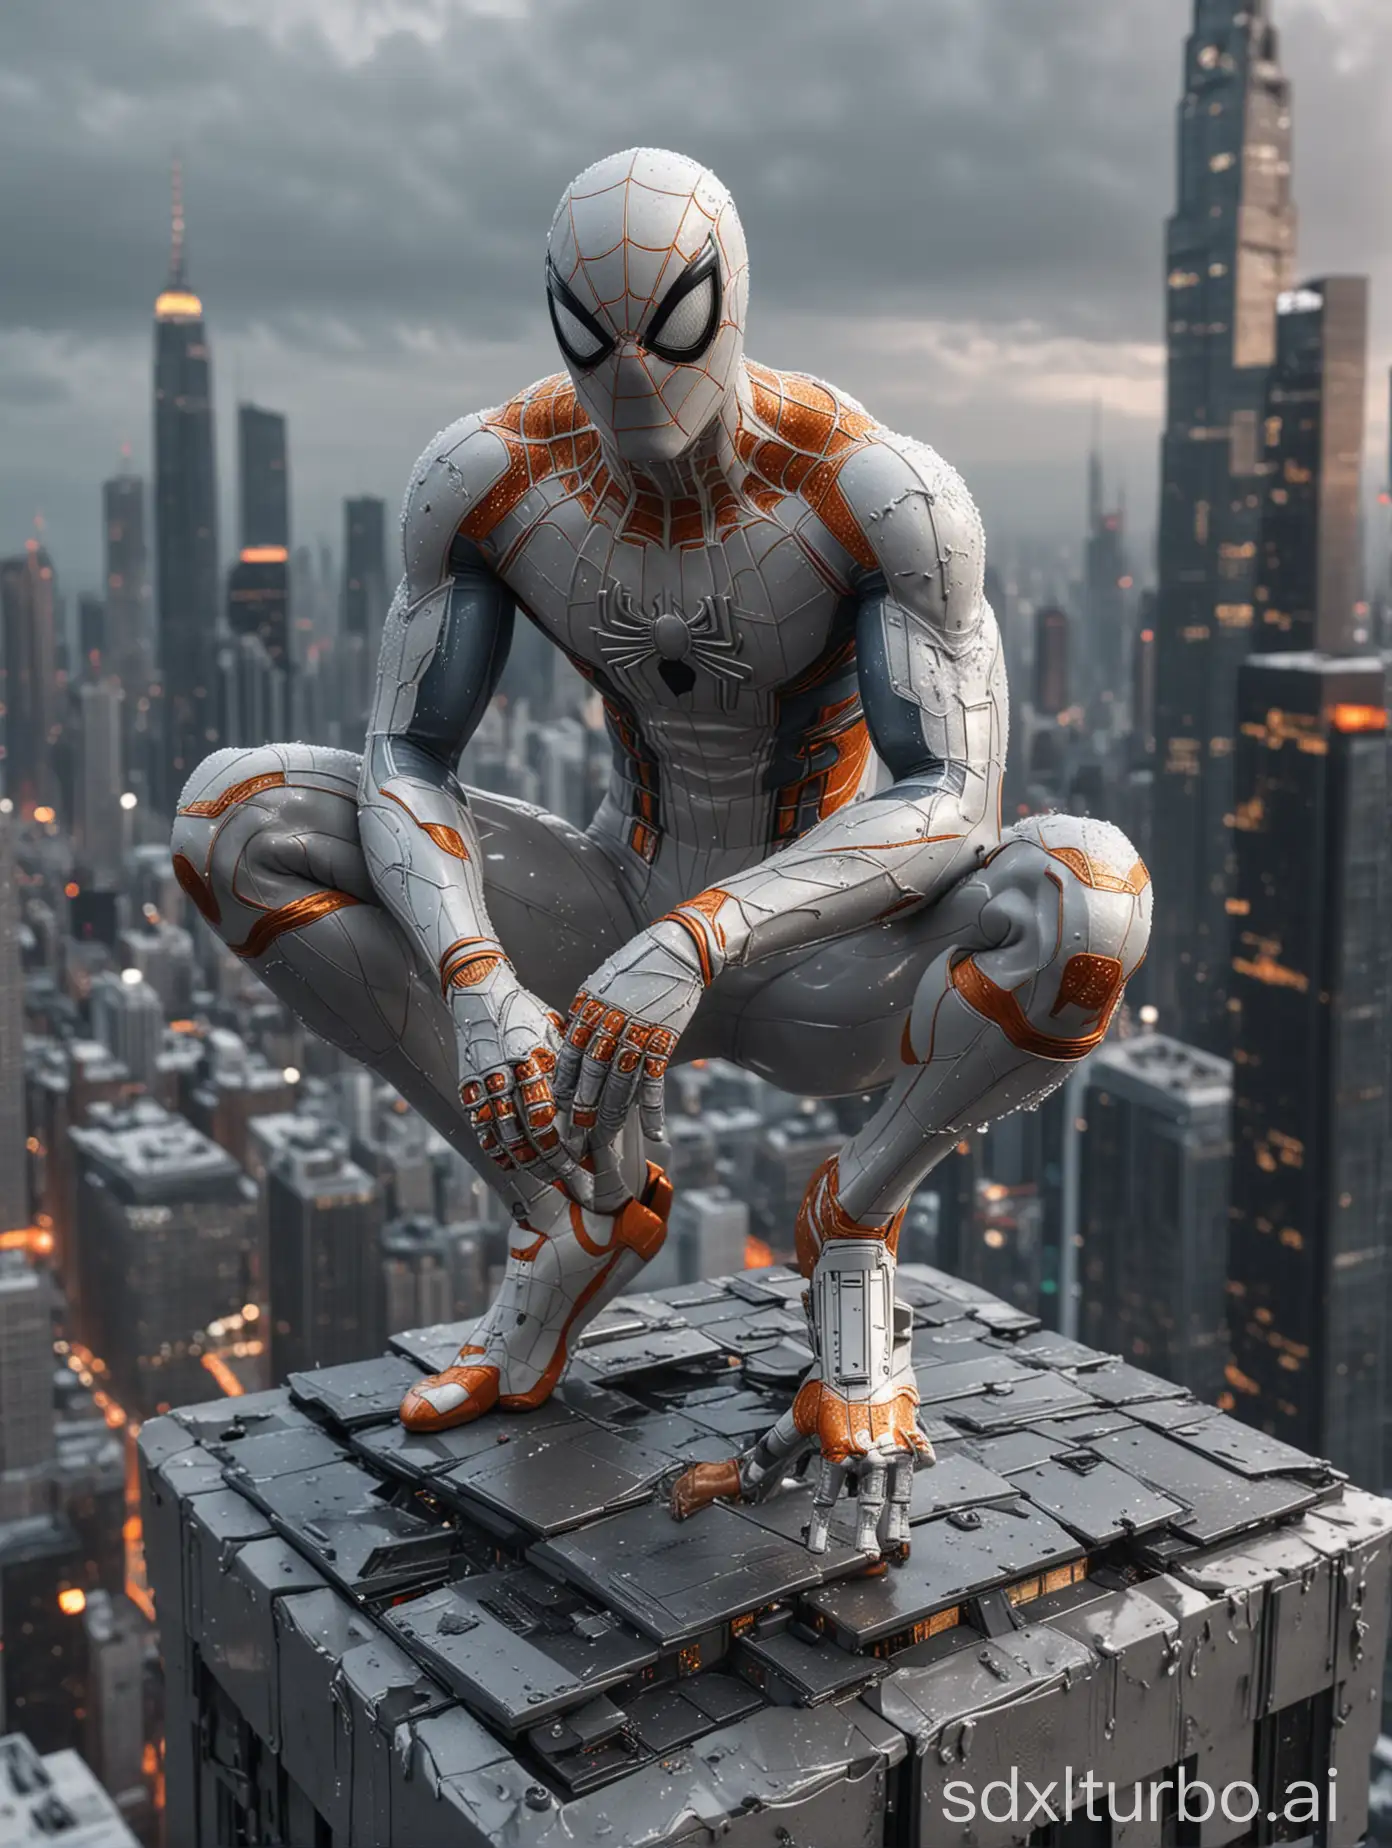 masterpiece, realistic image of spiderman dressed in white shinny robotic porcelain, perched on top of a skyscraper, twilight atmosphere, gray sky mixed with orange, very detailed, hyper realistic, photography, 8k resolution, after the rain fall